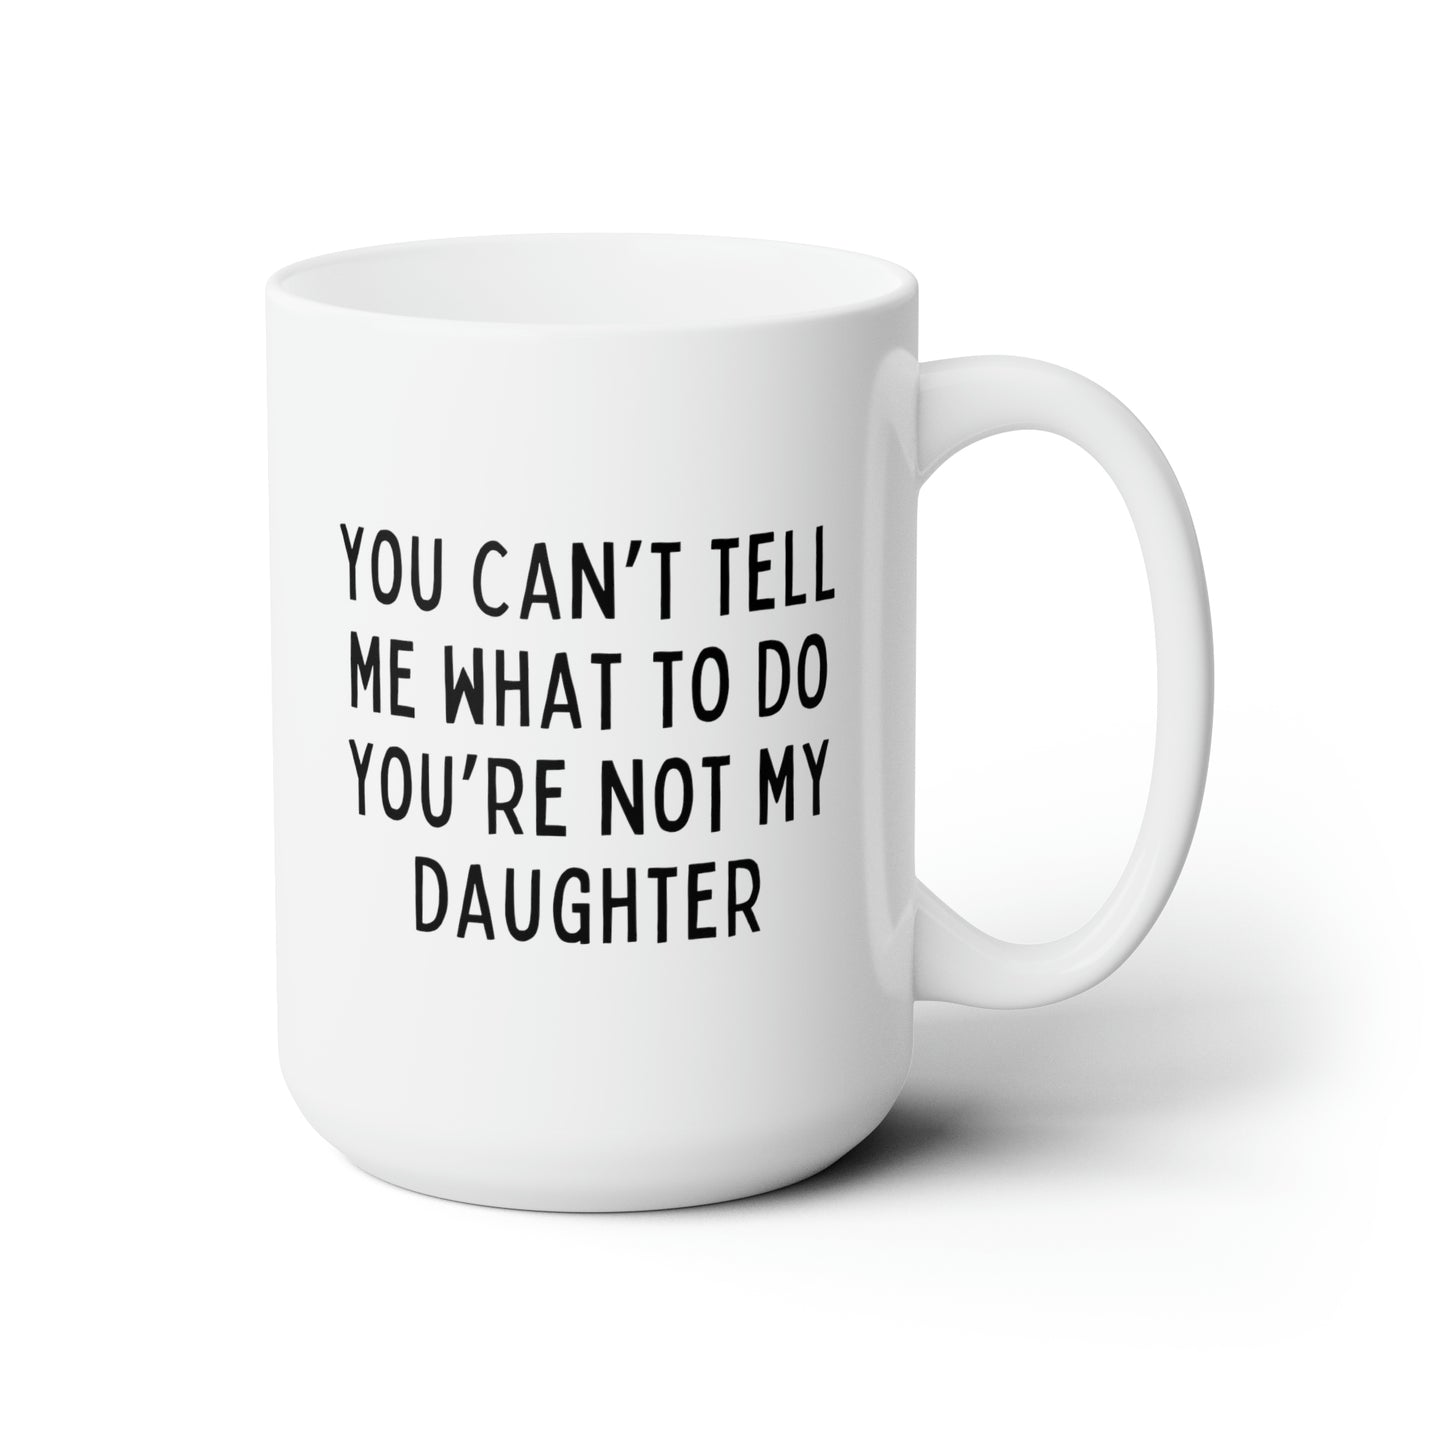 You Can't Tell Me What To Do You're Not My Daughter 15oz white funny large coffee mug gift for dad fathers day grandfather grandpa waveywares wavey wares wavywares wavy wares